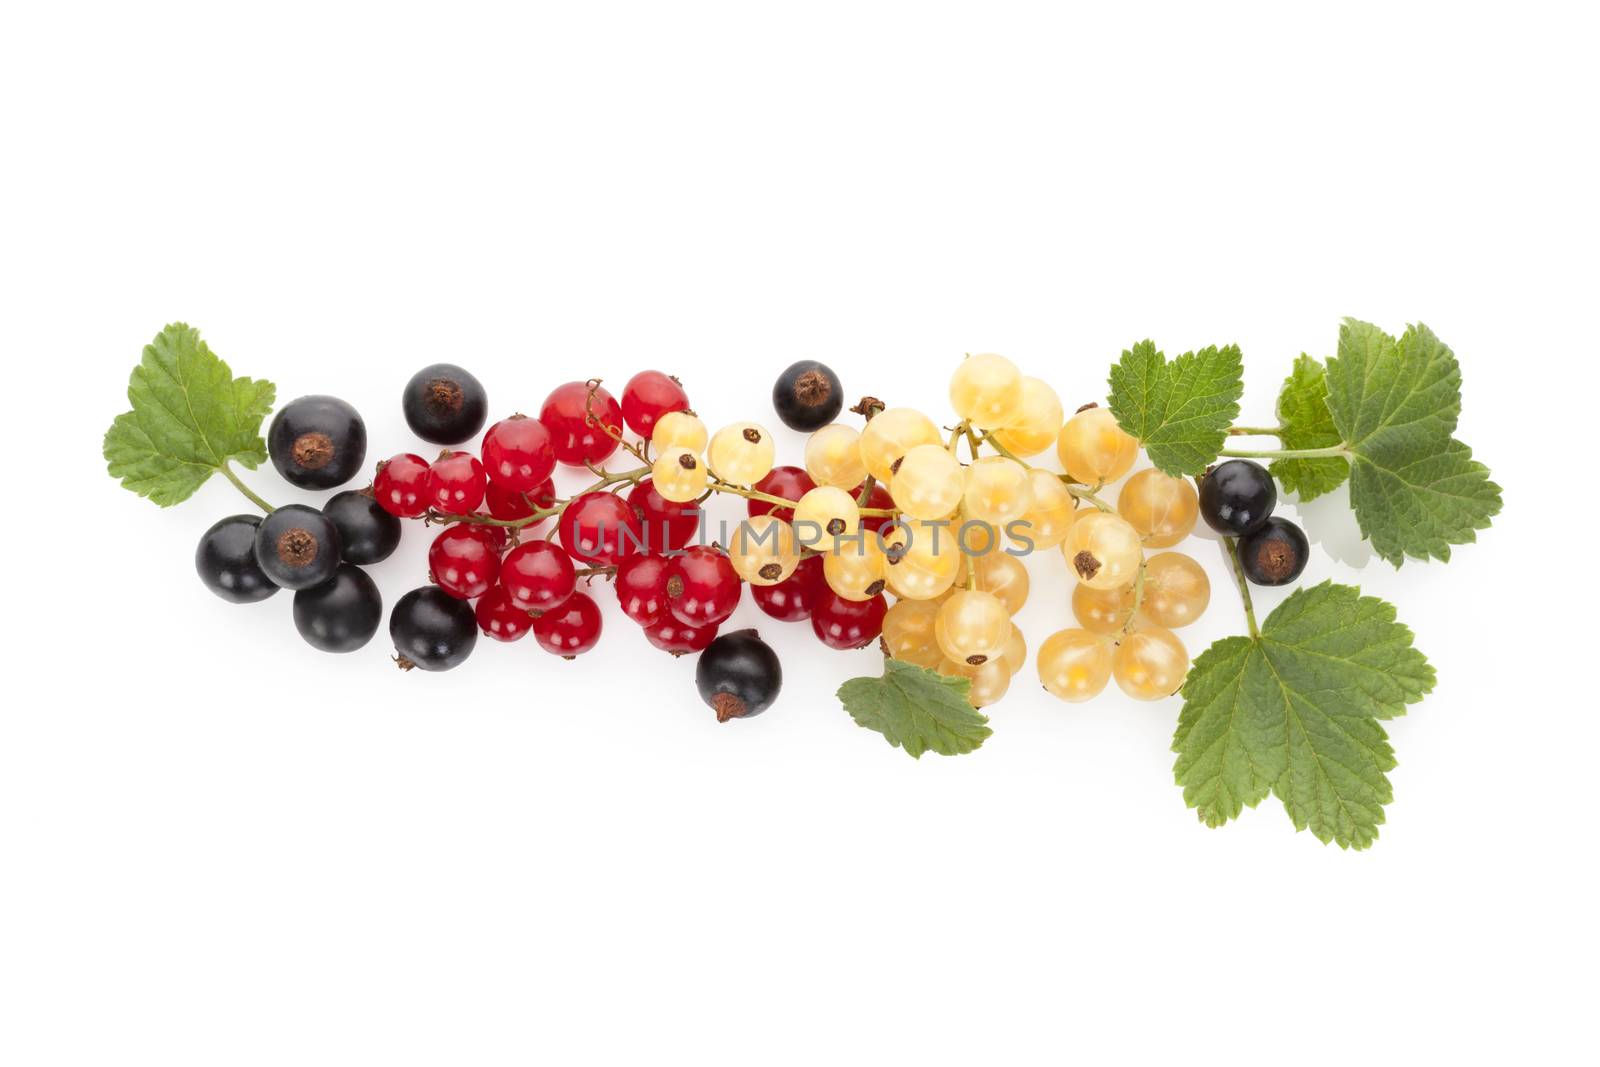 Red, white and black currant on white background. by eskymaks